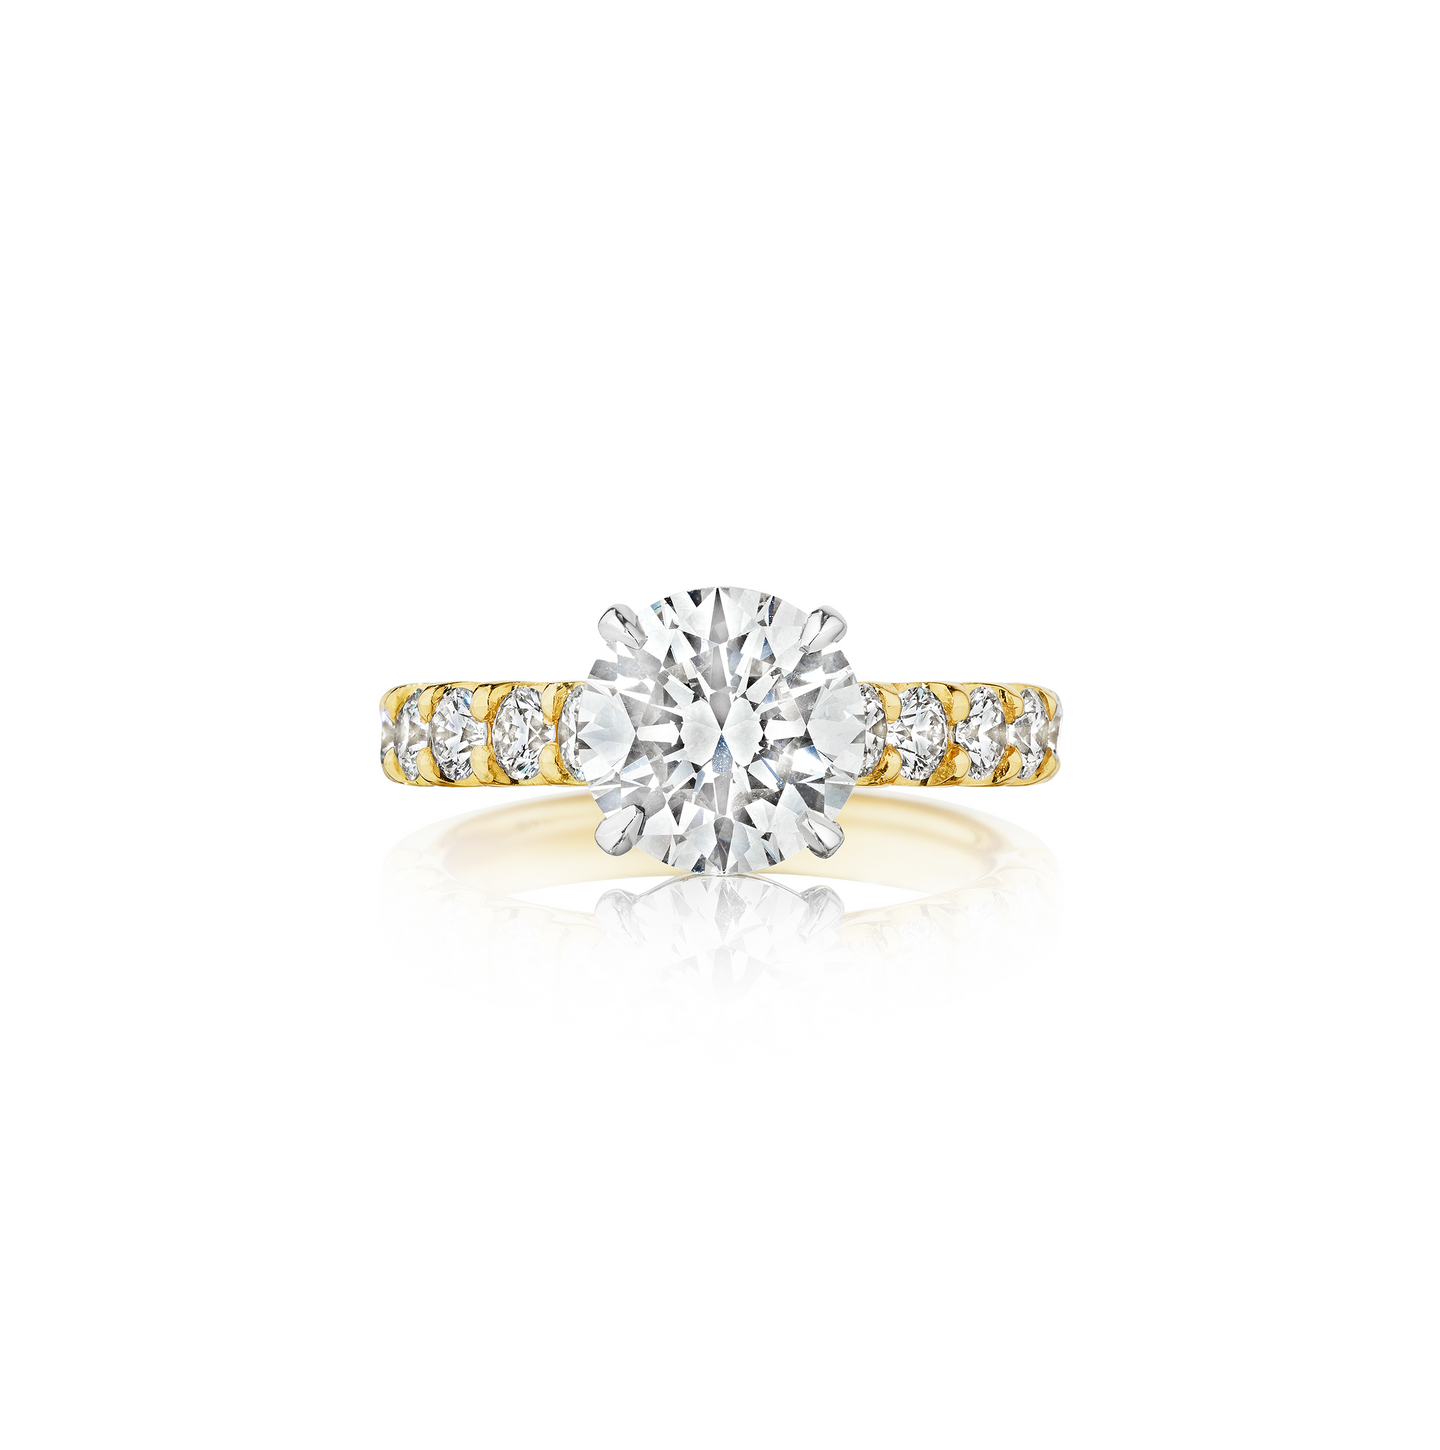 Fink's Exclusive Yellow Gold and Platinum Round Diamond Engagement Ring